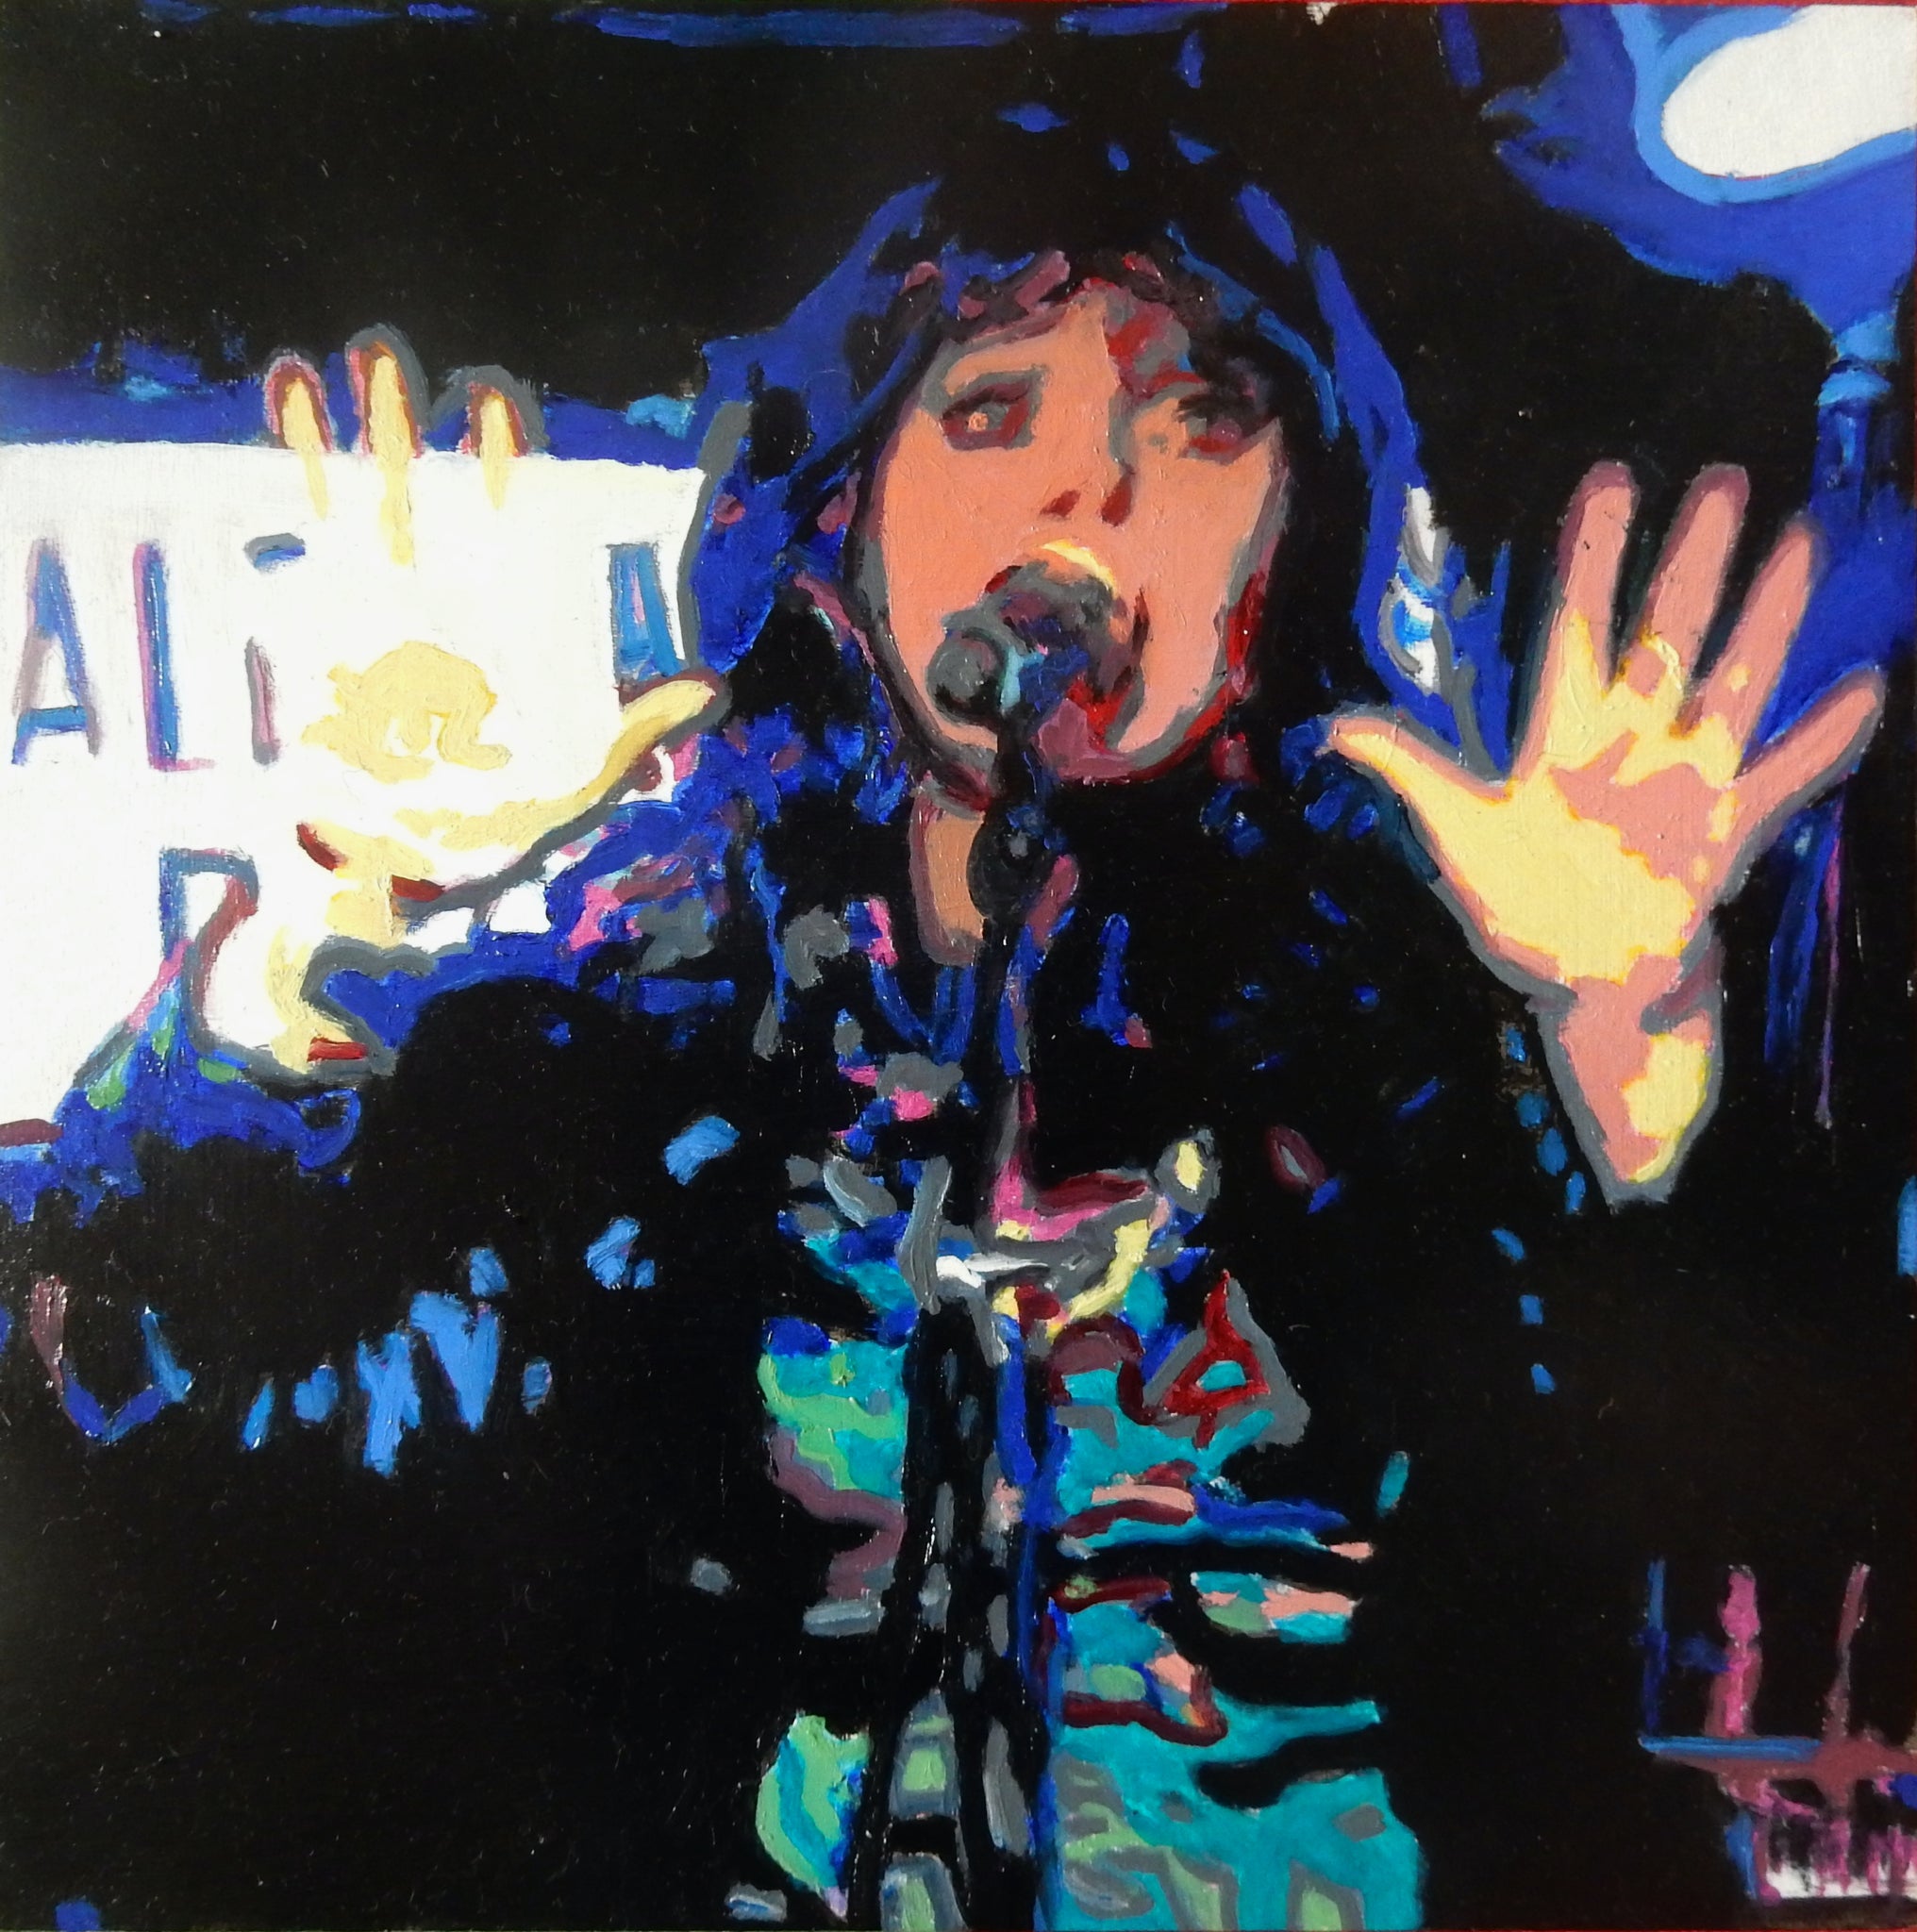 Cloudbusting tribute band to Kate Bush oil on cradled gesso panel by Stella Tooth artist